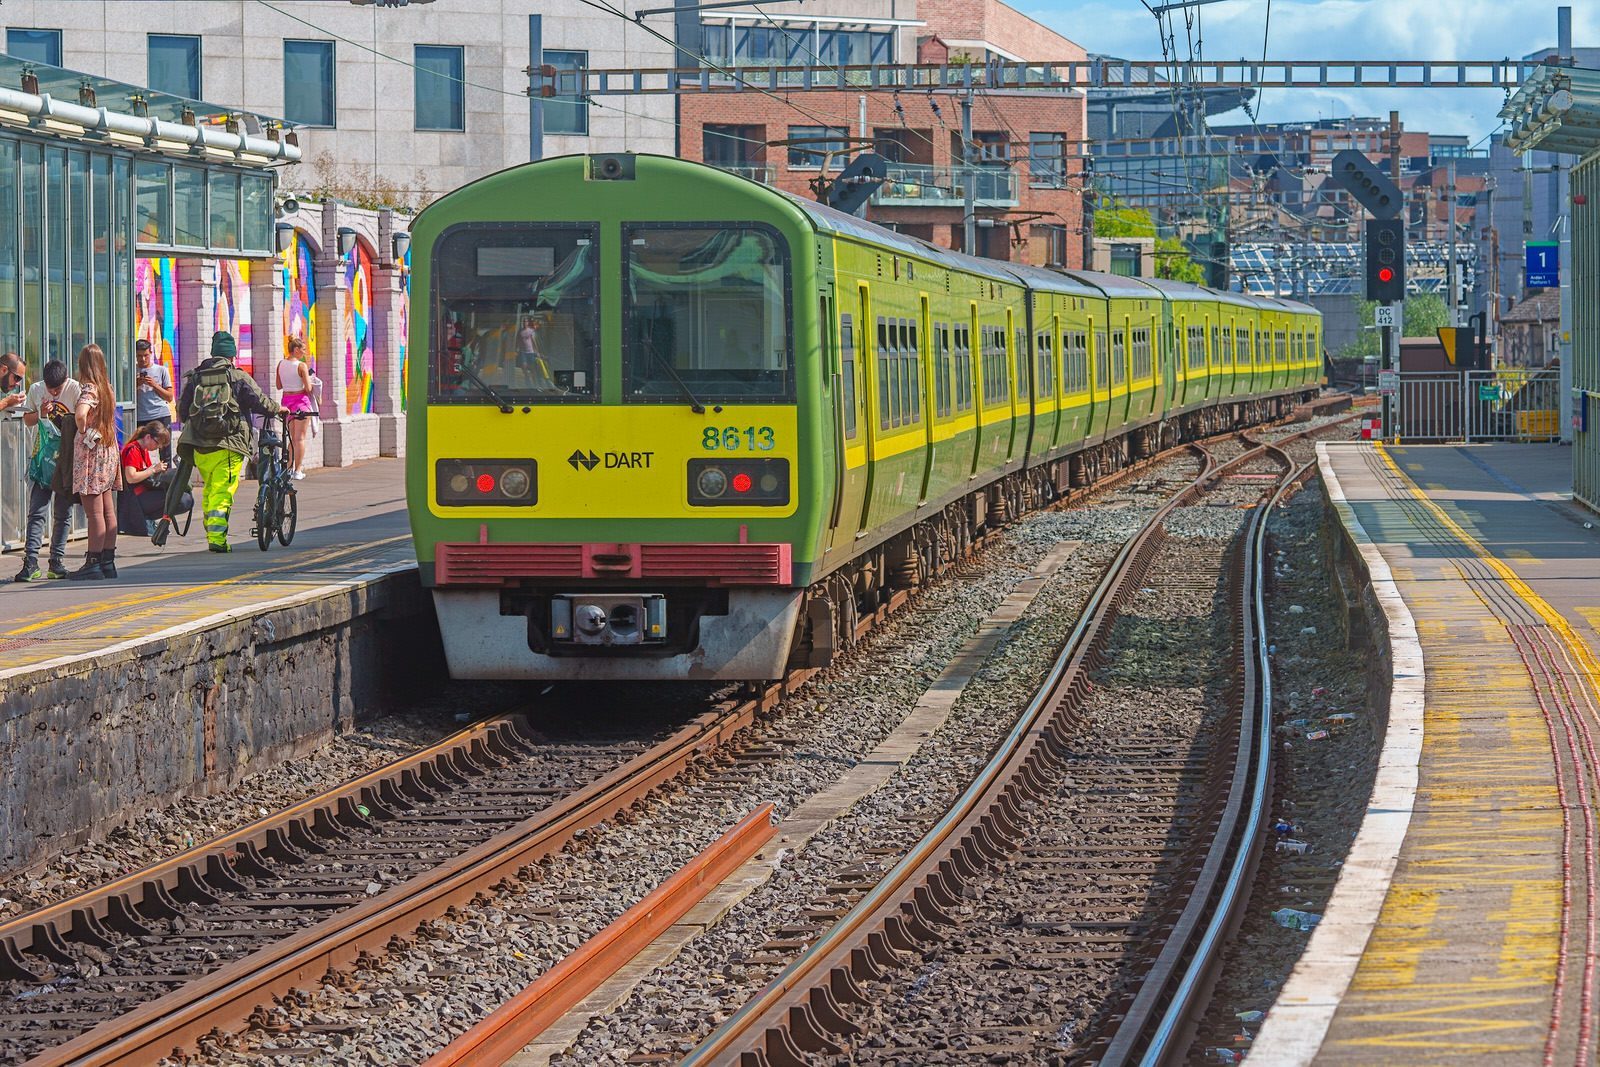 COMPRESSED VIEWS OF TARA STREET TRAIN STATION [I USED THE EQUIVALENT OF A 130MM LENS] 017